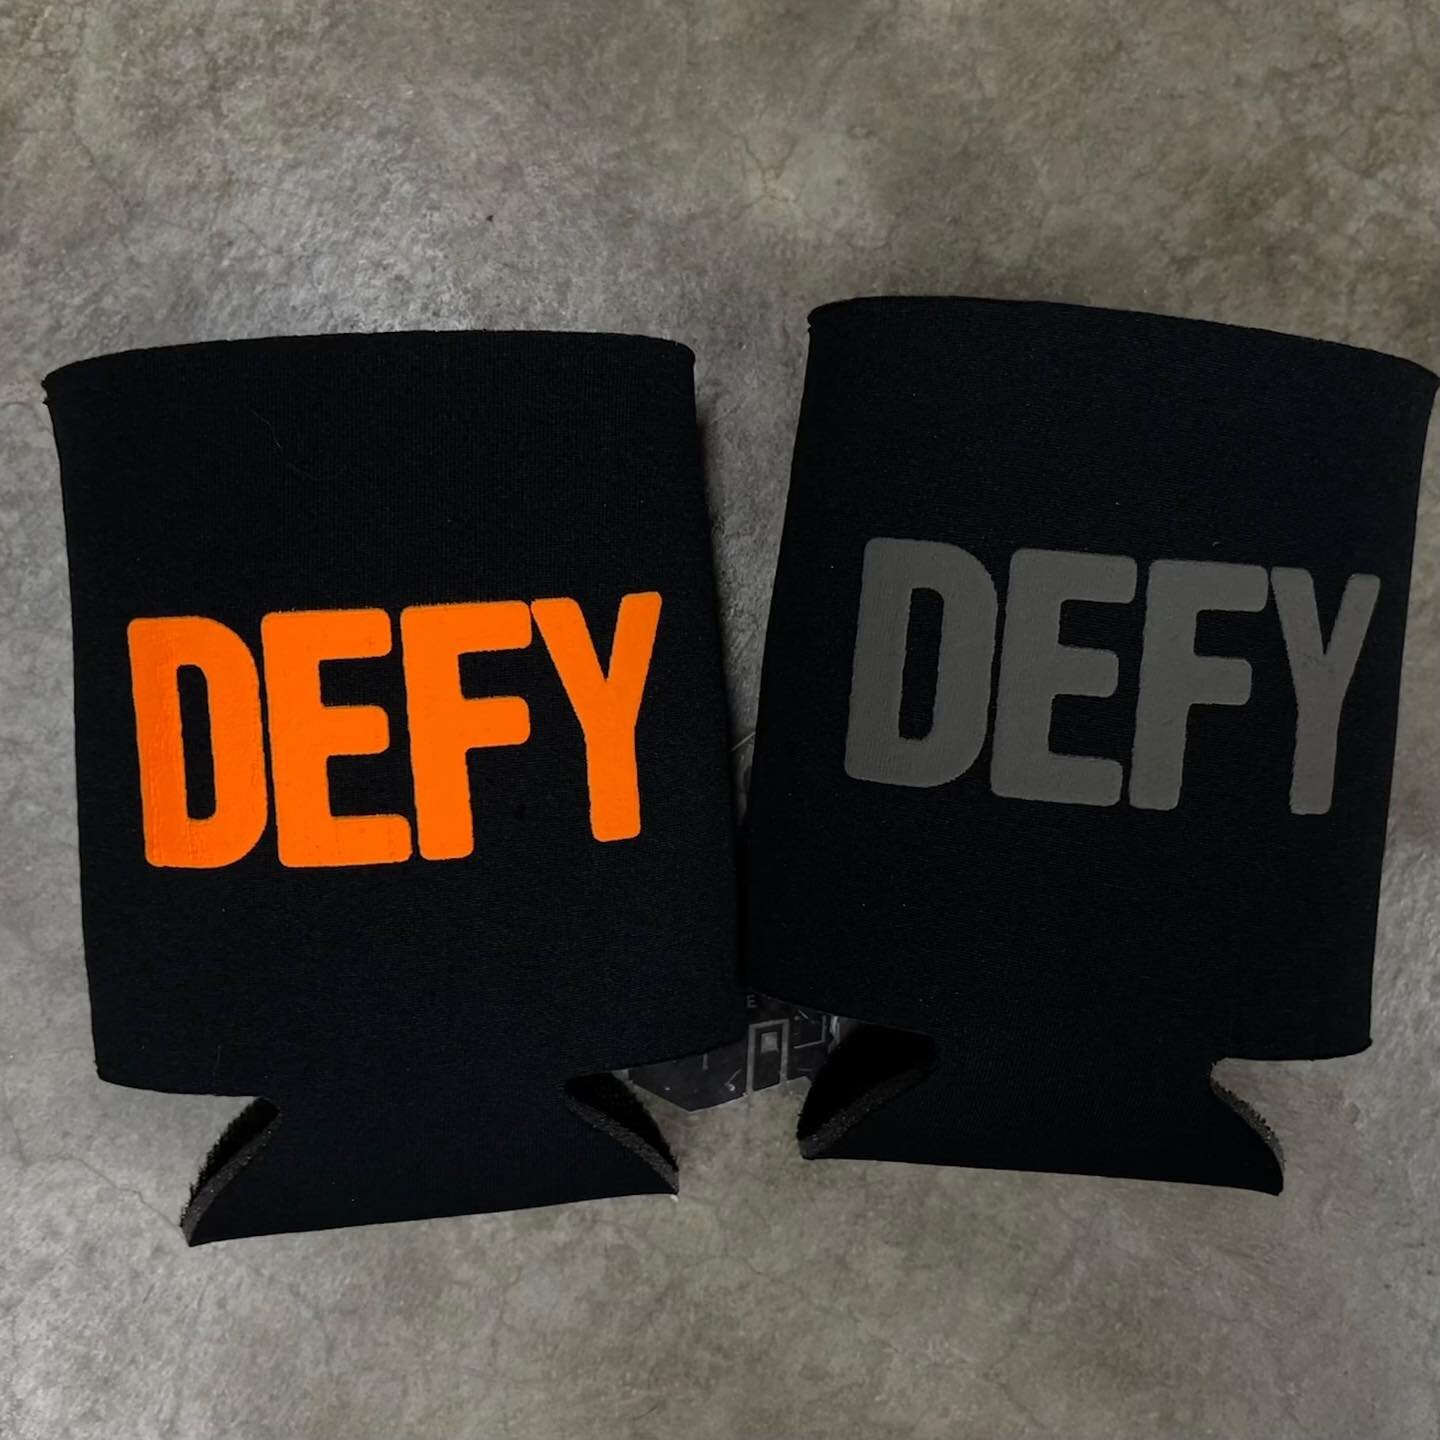 The @defybags koozie. Great bags made by great people right here in Chicago. If you need an over-engineered bag or other accessory, can&rsquo;t recommend these folks enough. 
💥🏠💥

#explodinghouseprinting #defybagschicago #defybags #koozie #chicago